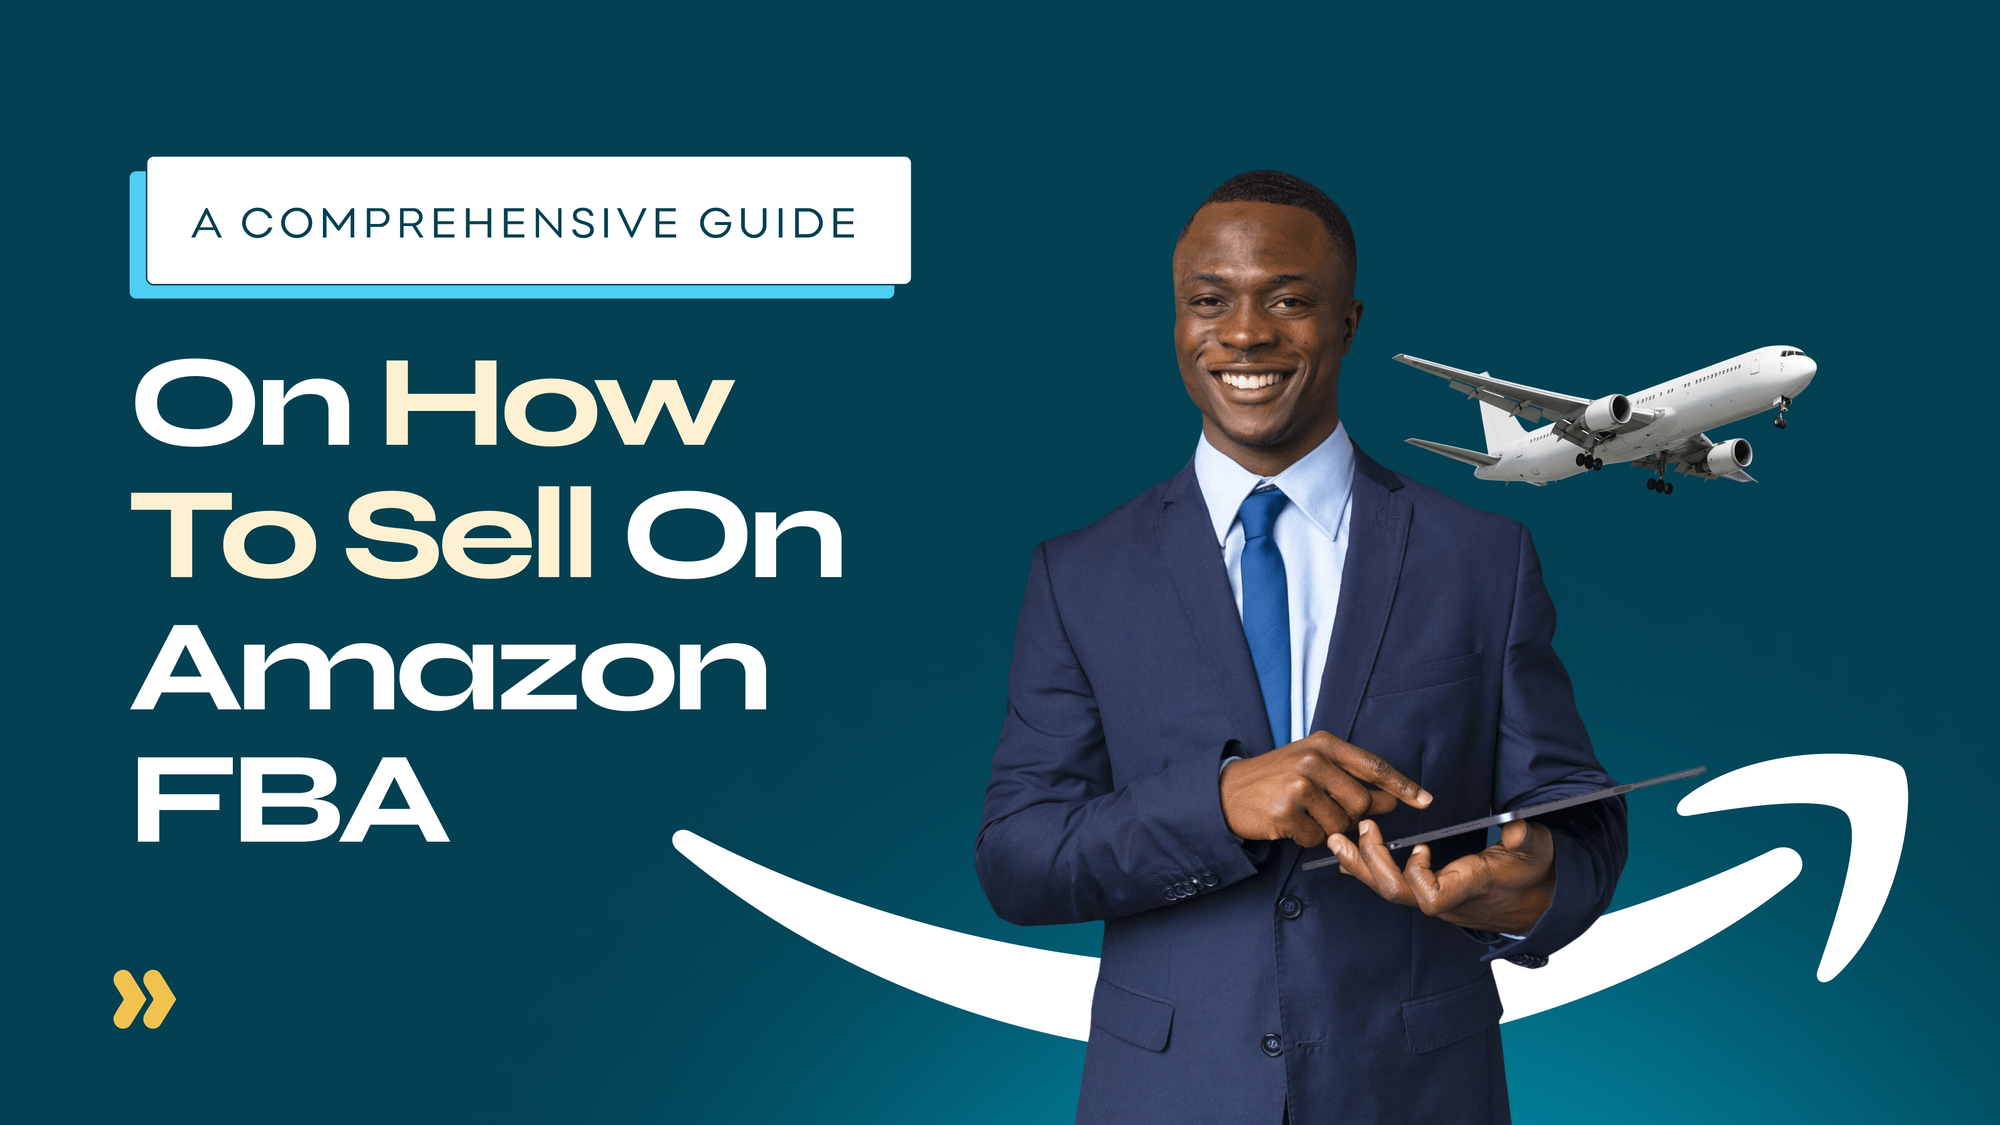 A Comprehensive Guide on How to Sell on Amazon FBA